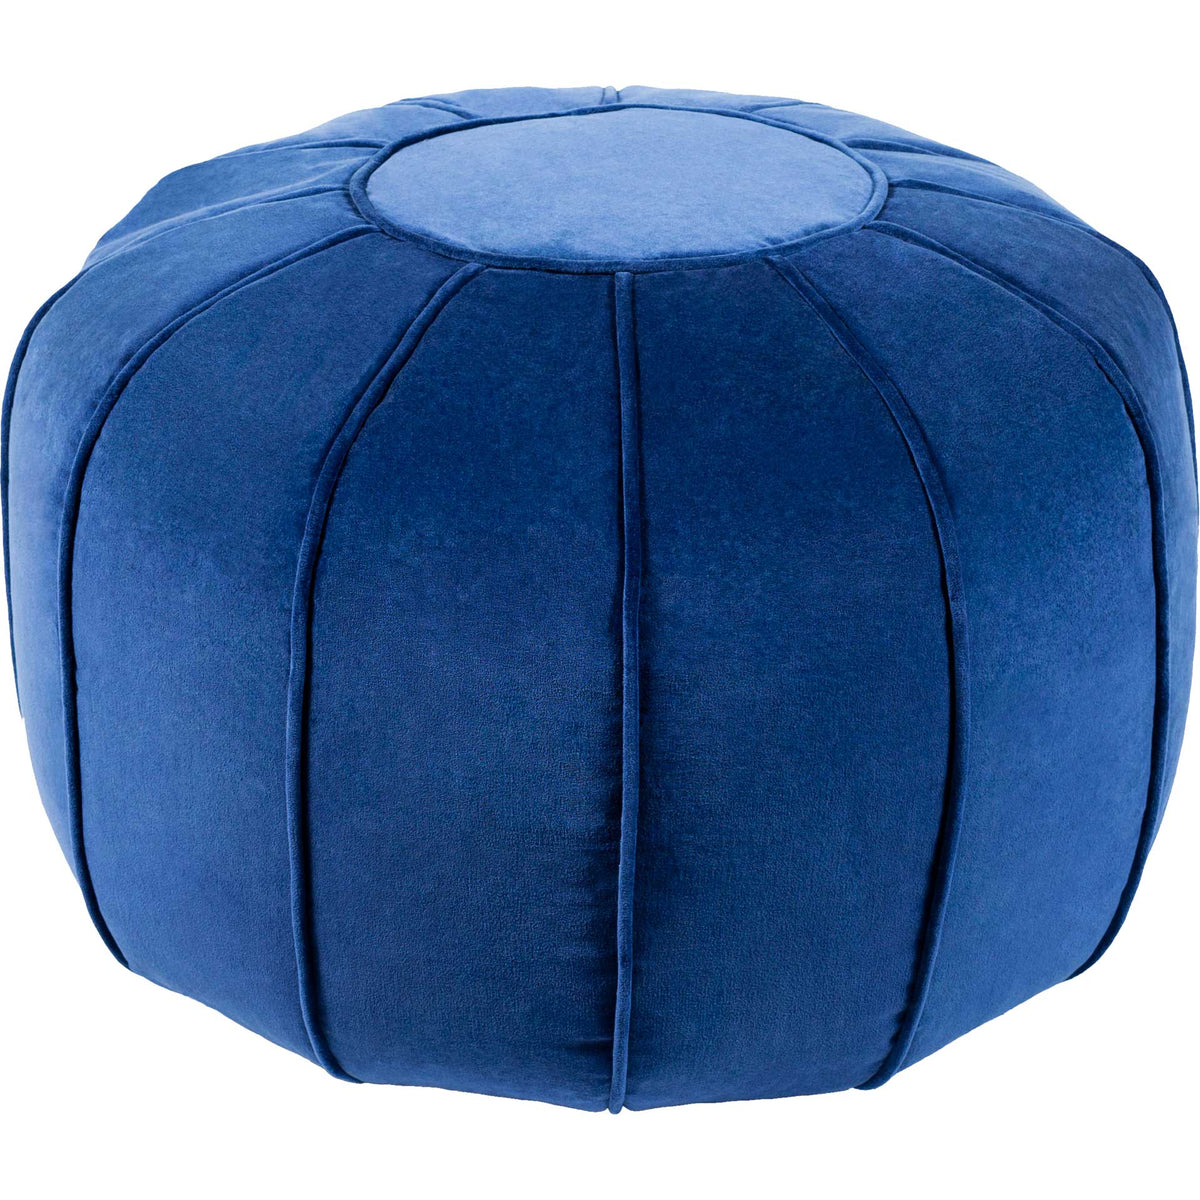 Conner Pouf Navy